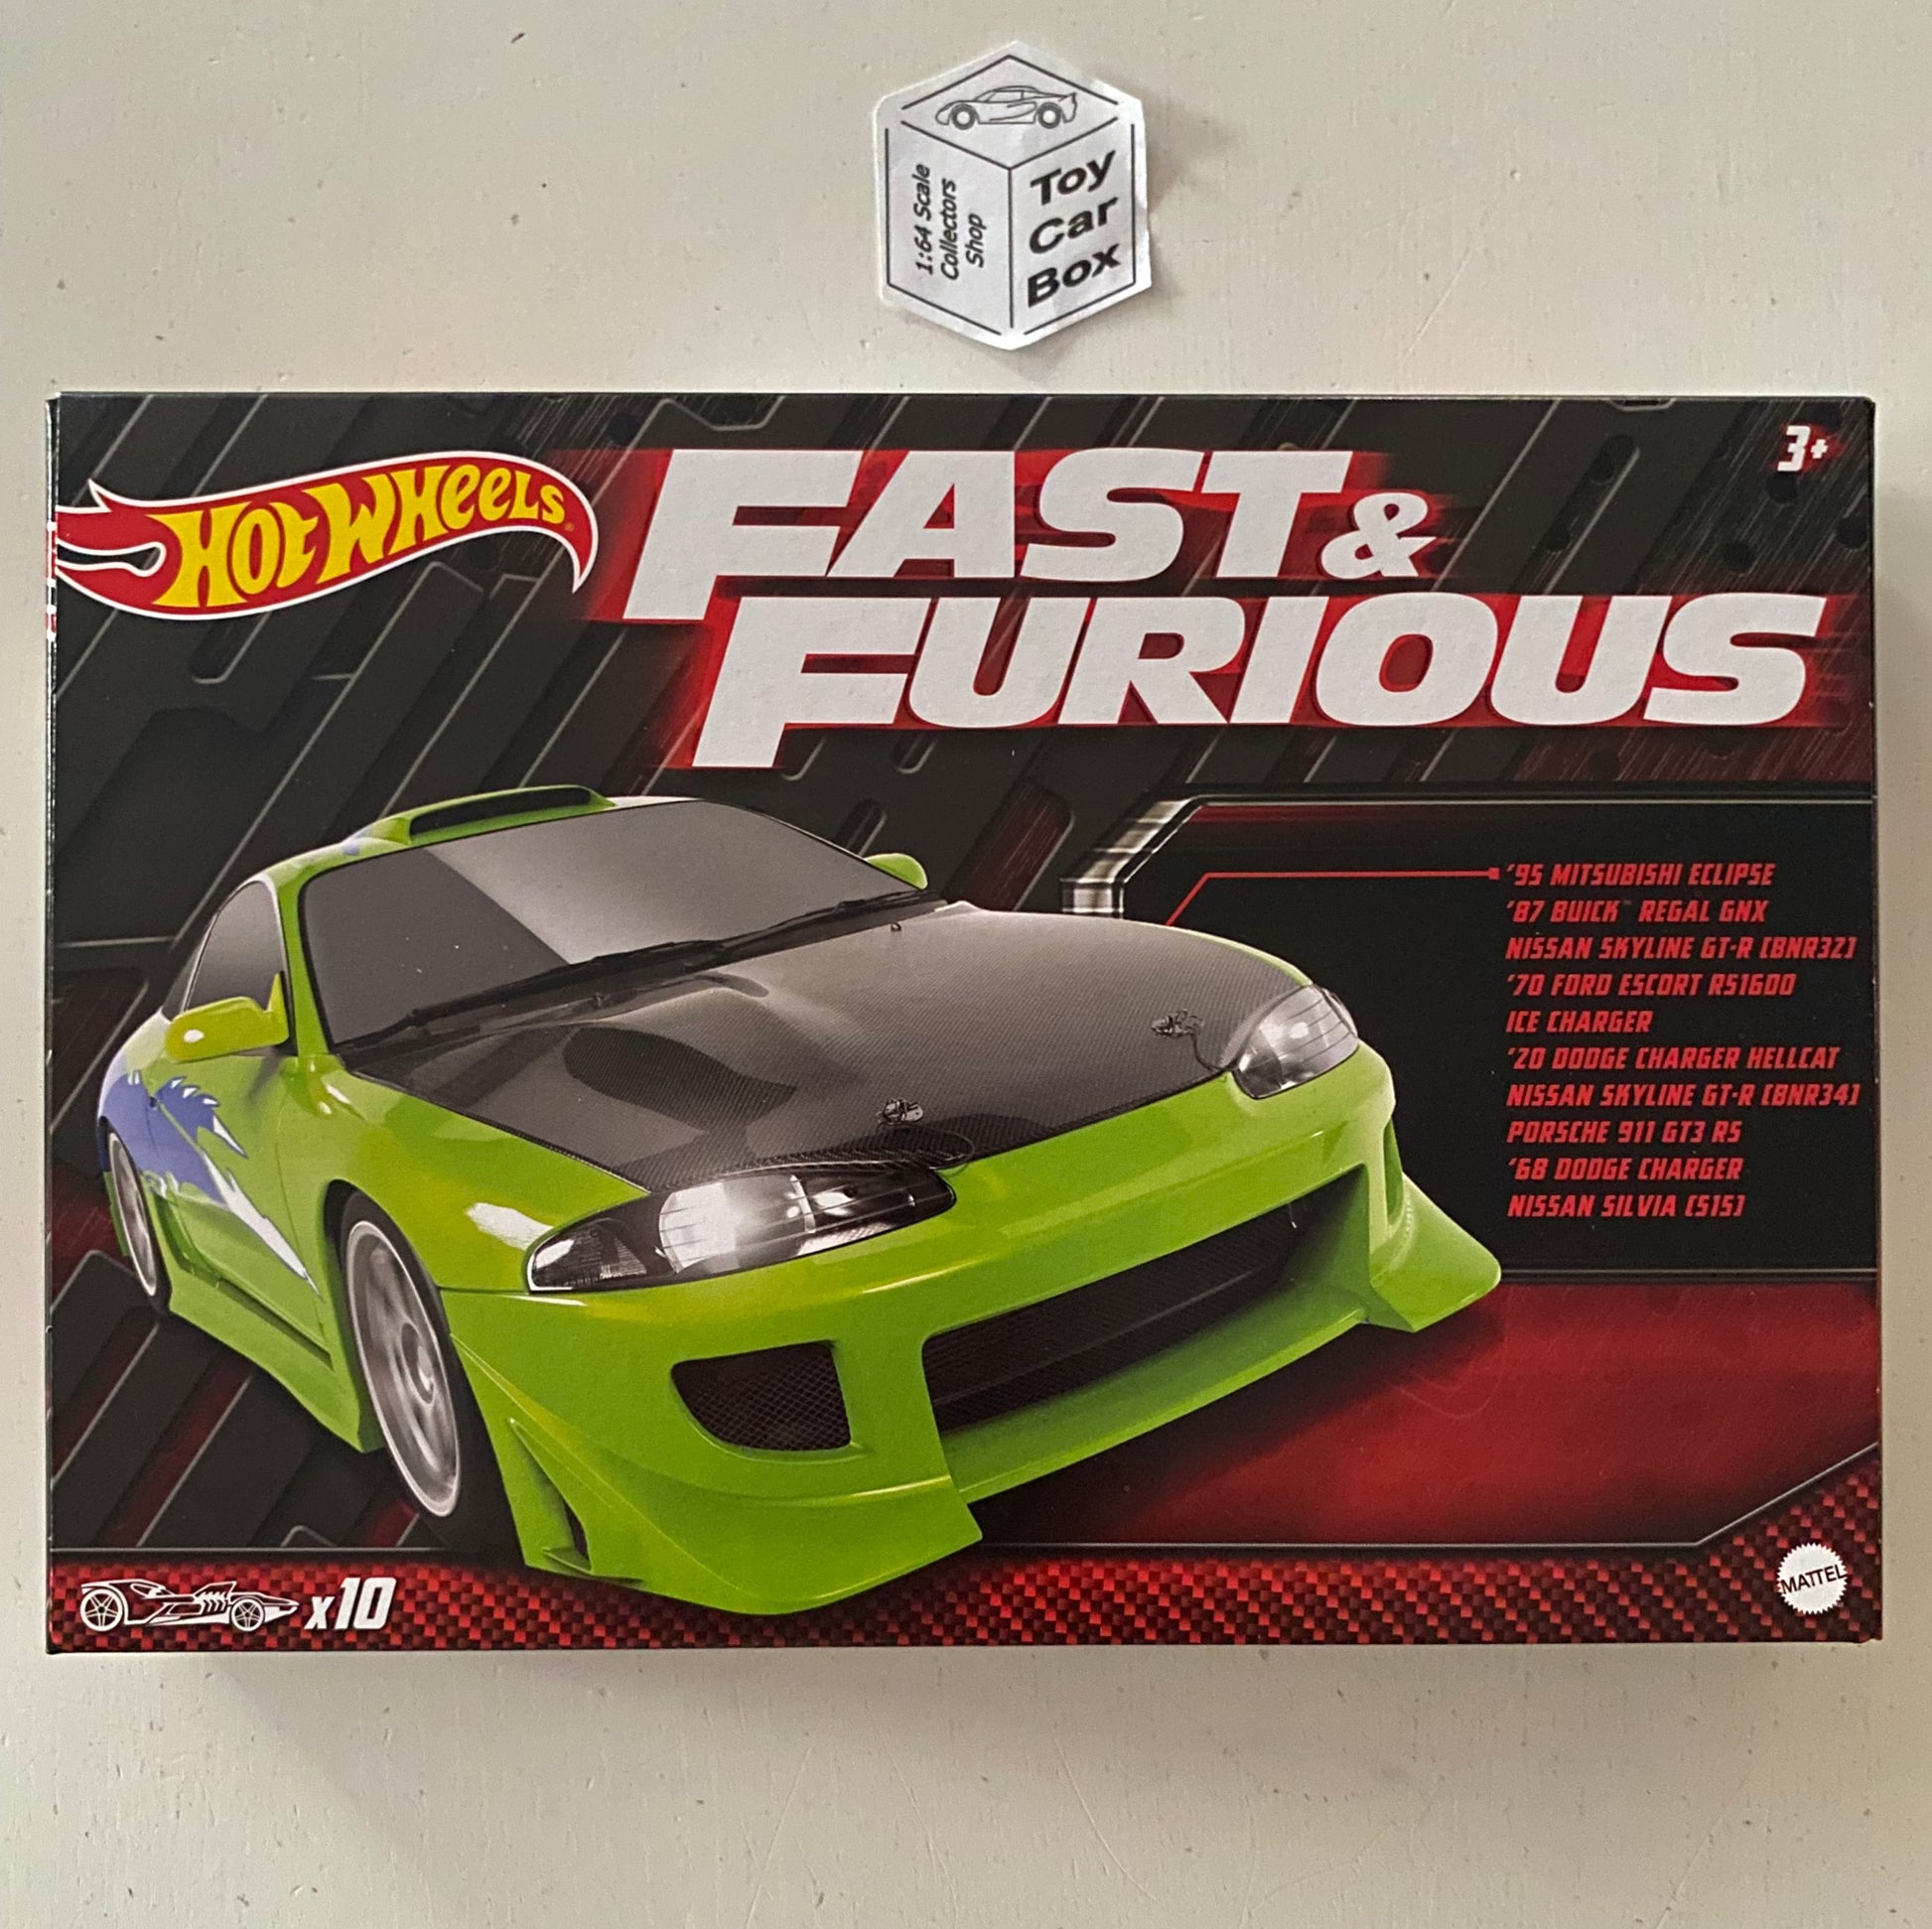 fast and furious 3 toy cars